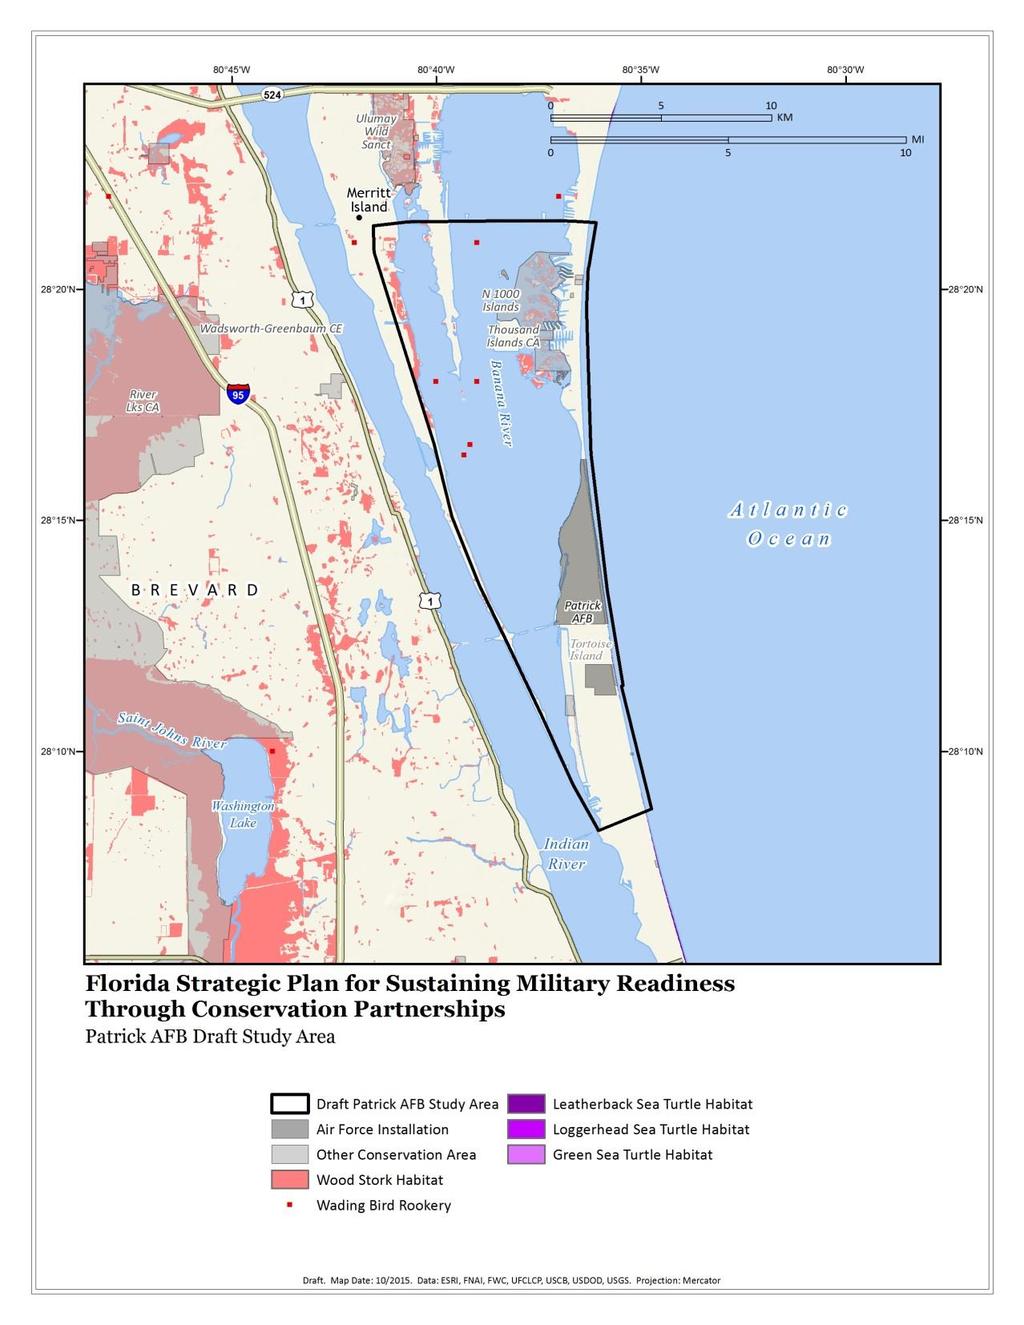 Draft Study Areas: Patrick AFB Used sea turtle nesting habitat, wood stork habitat to indicate wetland conservation/management opportunities, seagrass areas, and wading bird